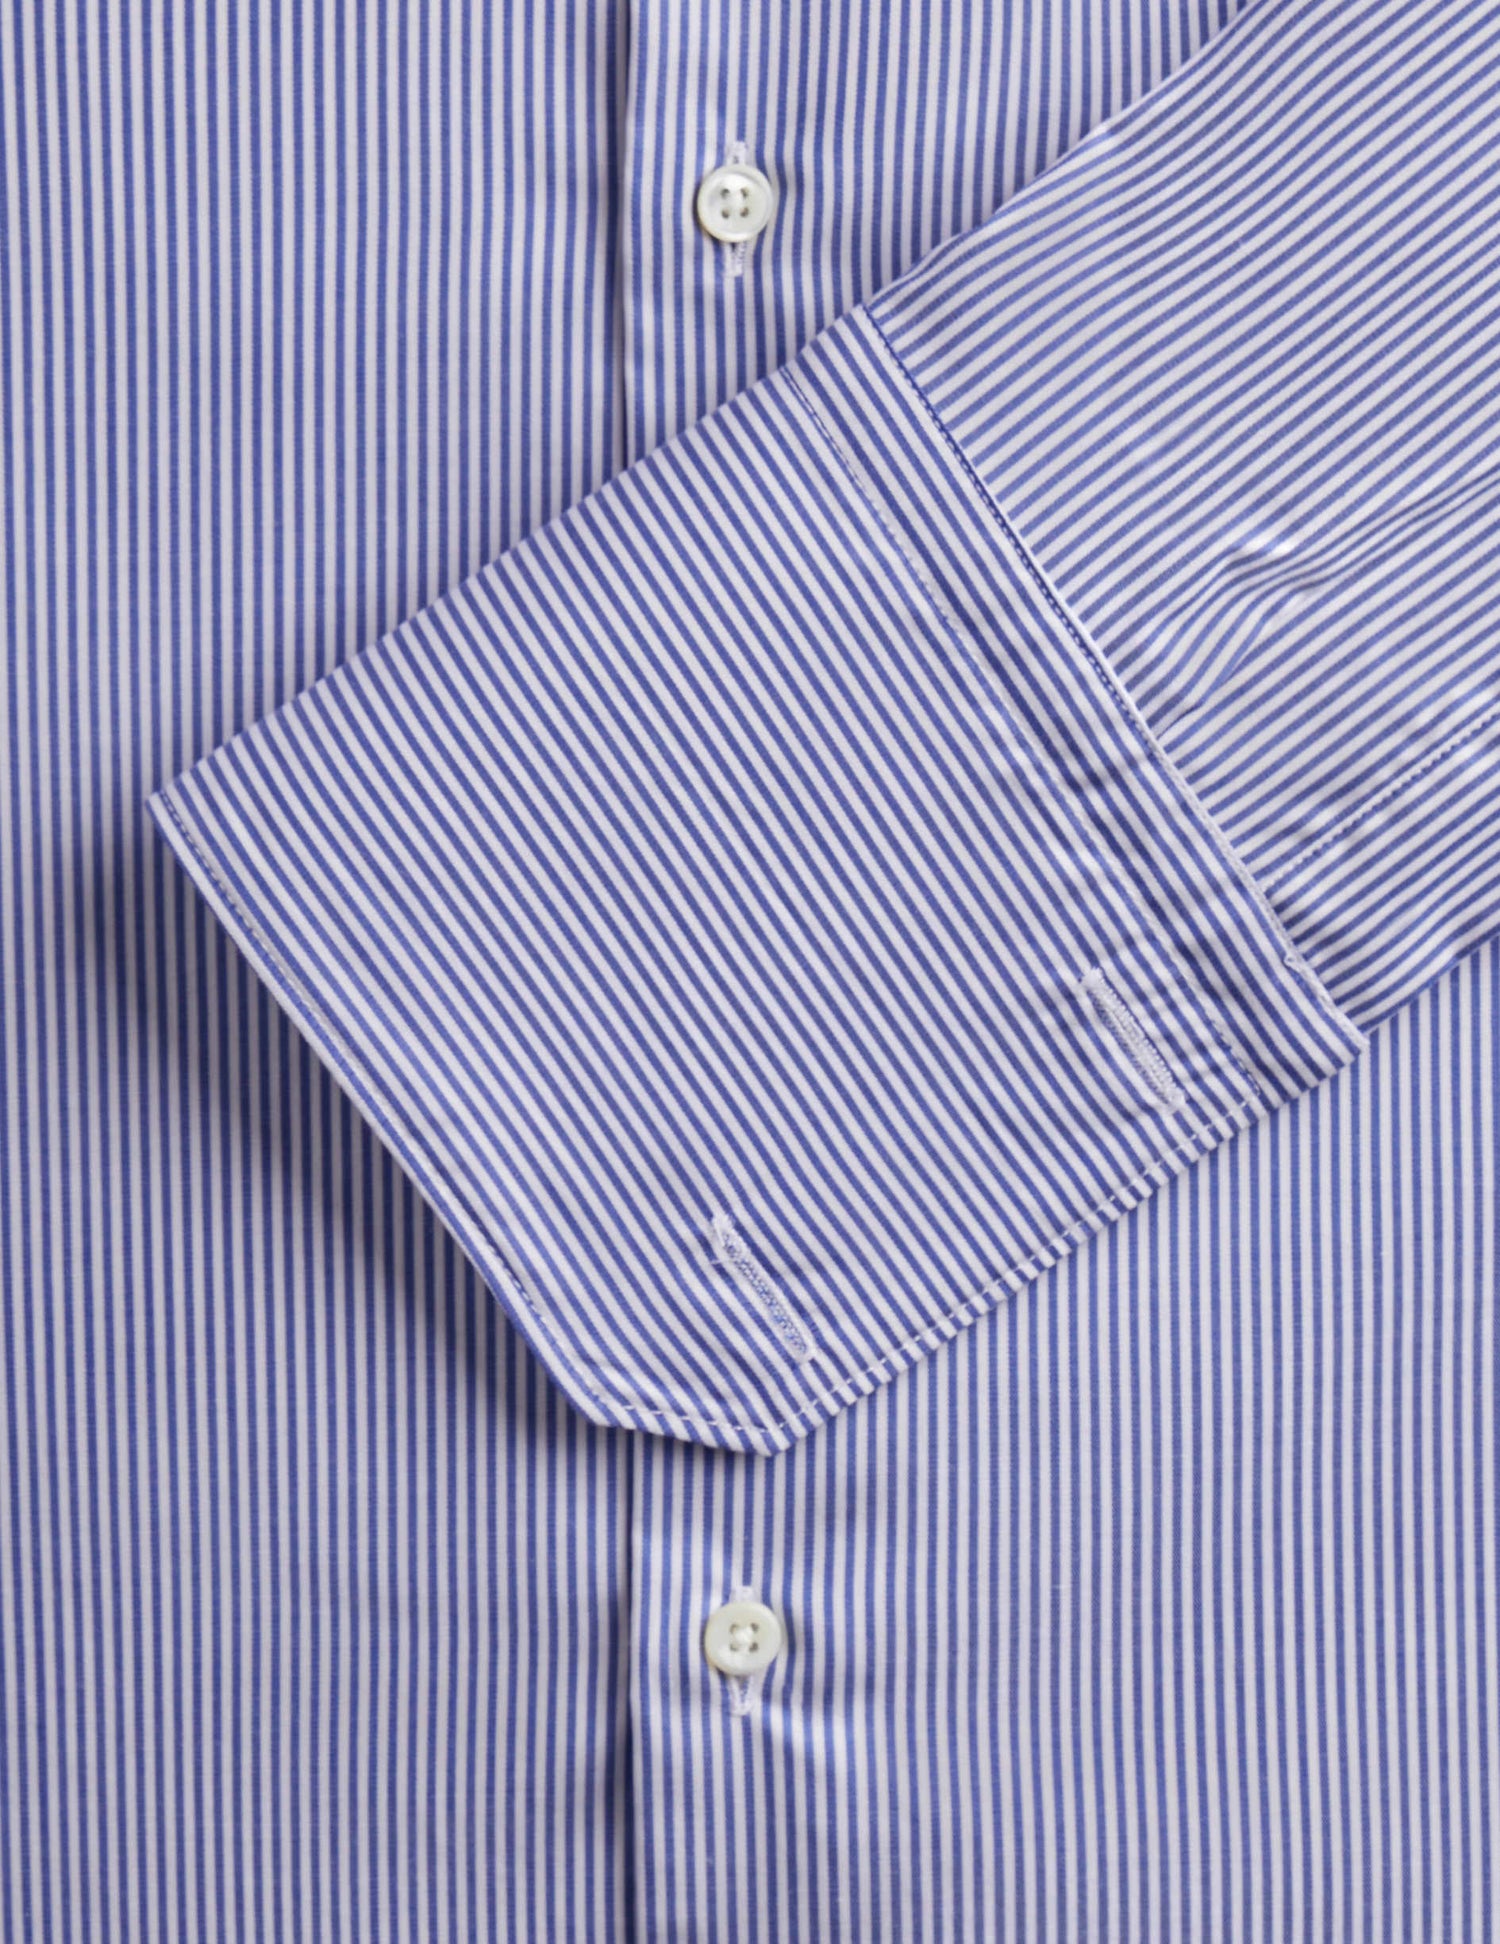 Fitted navy striped shirt - Twill - Figaret Collar - French Cuffs#2